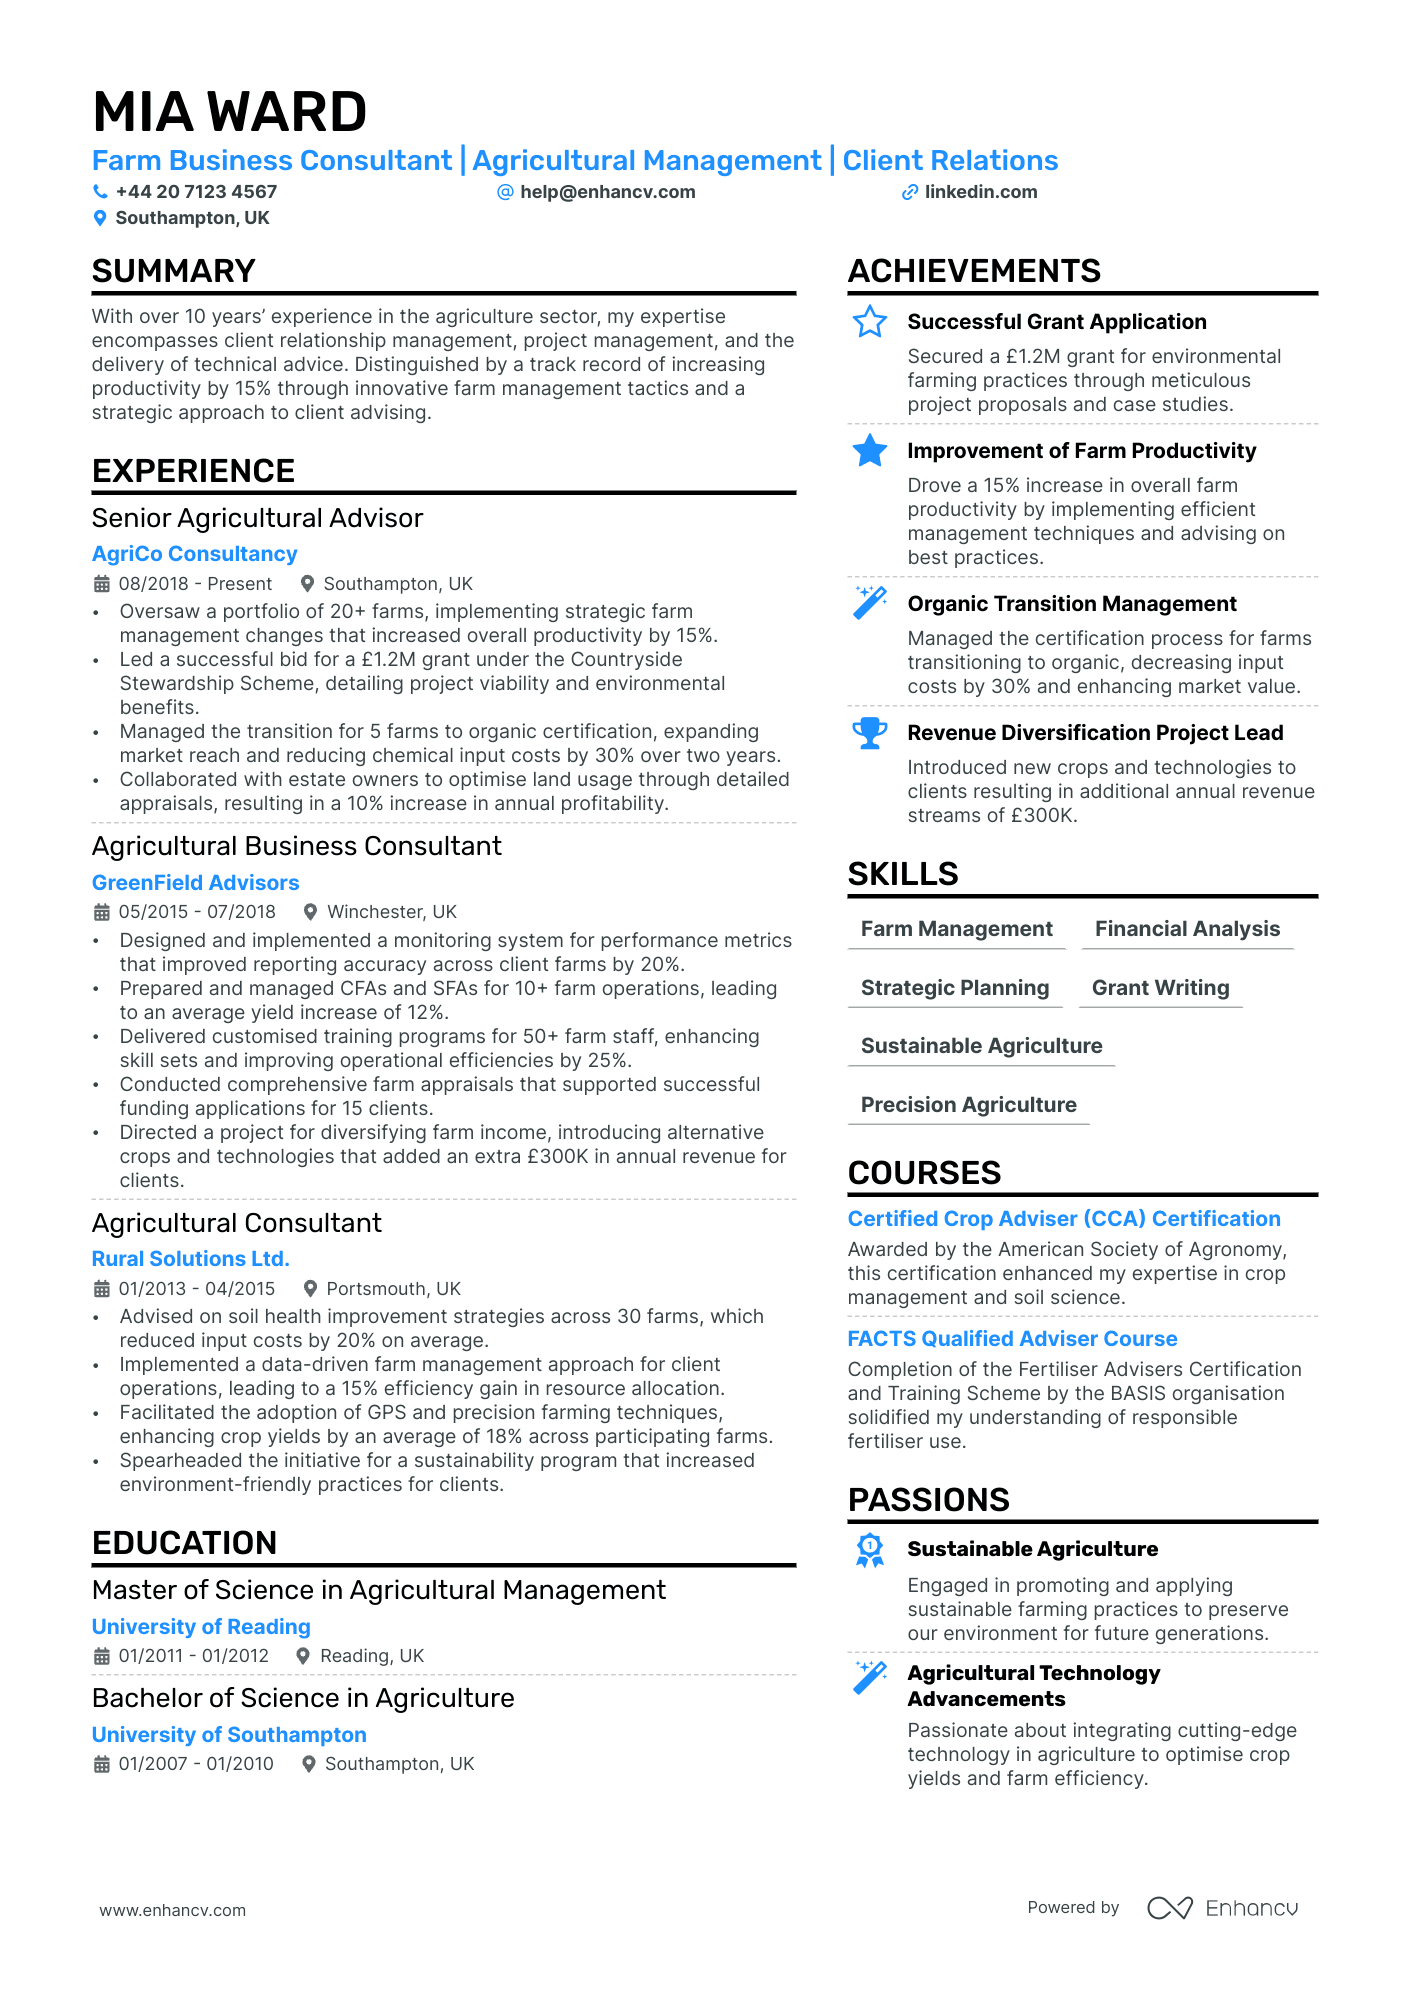 Business Consultant cv example